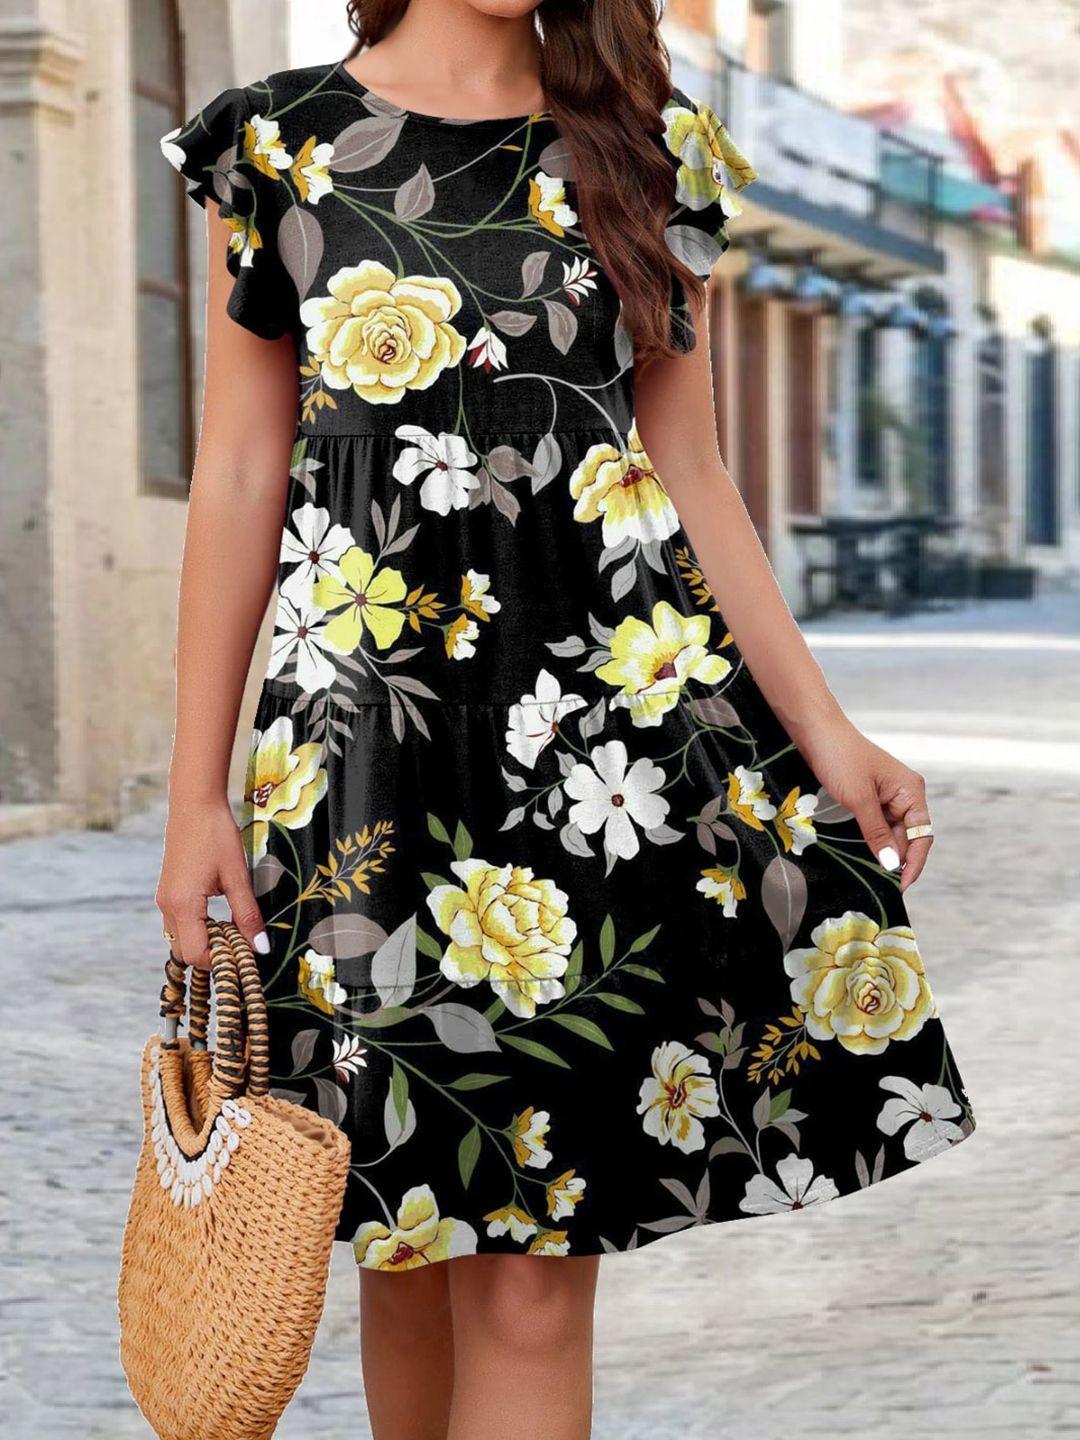 stylecast x kpop floral printed flutter sleeves fit & flare dress